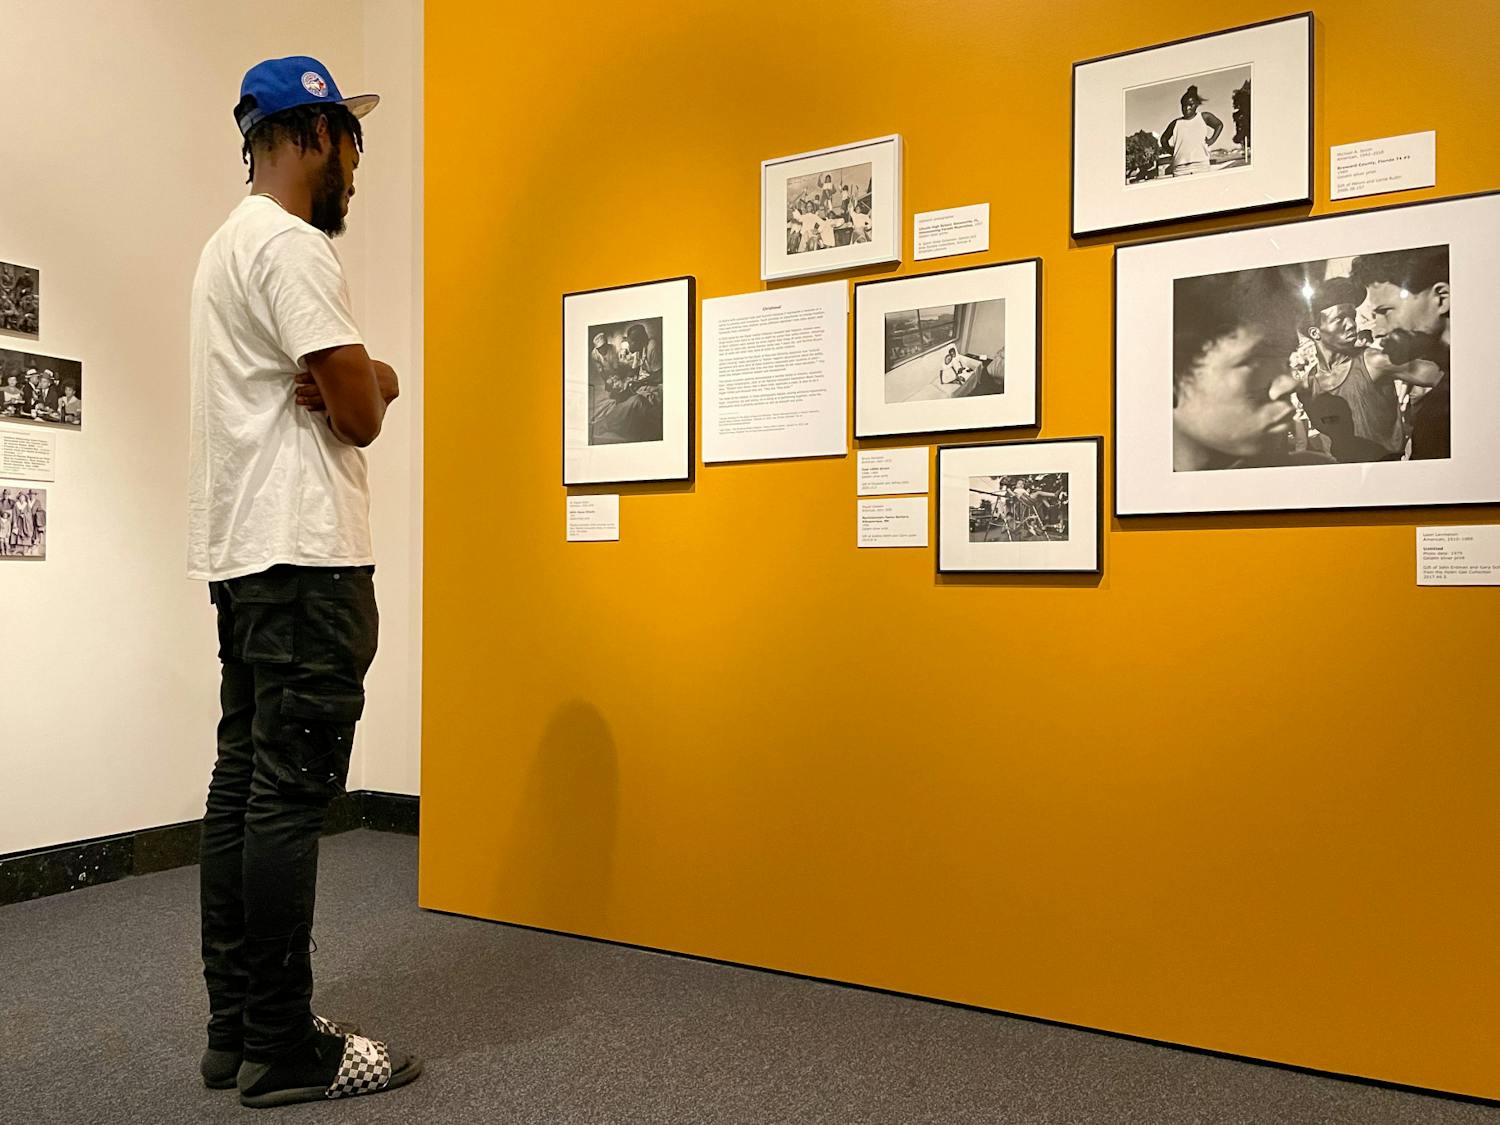 Dolce Douvert, a Gainesville resident looks at photographs in the Harn Museum of Art on Tuesday, July 27, 2021. The photos are part of a new exhibition called Shadow to Substance, which tells African American stories chronologically through historical imagery and modern imagery taken by today’s Black photographers.